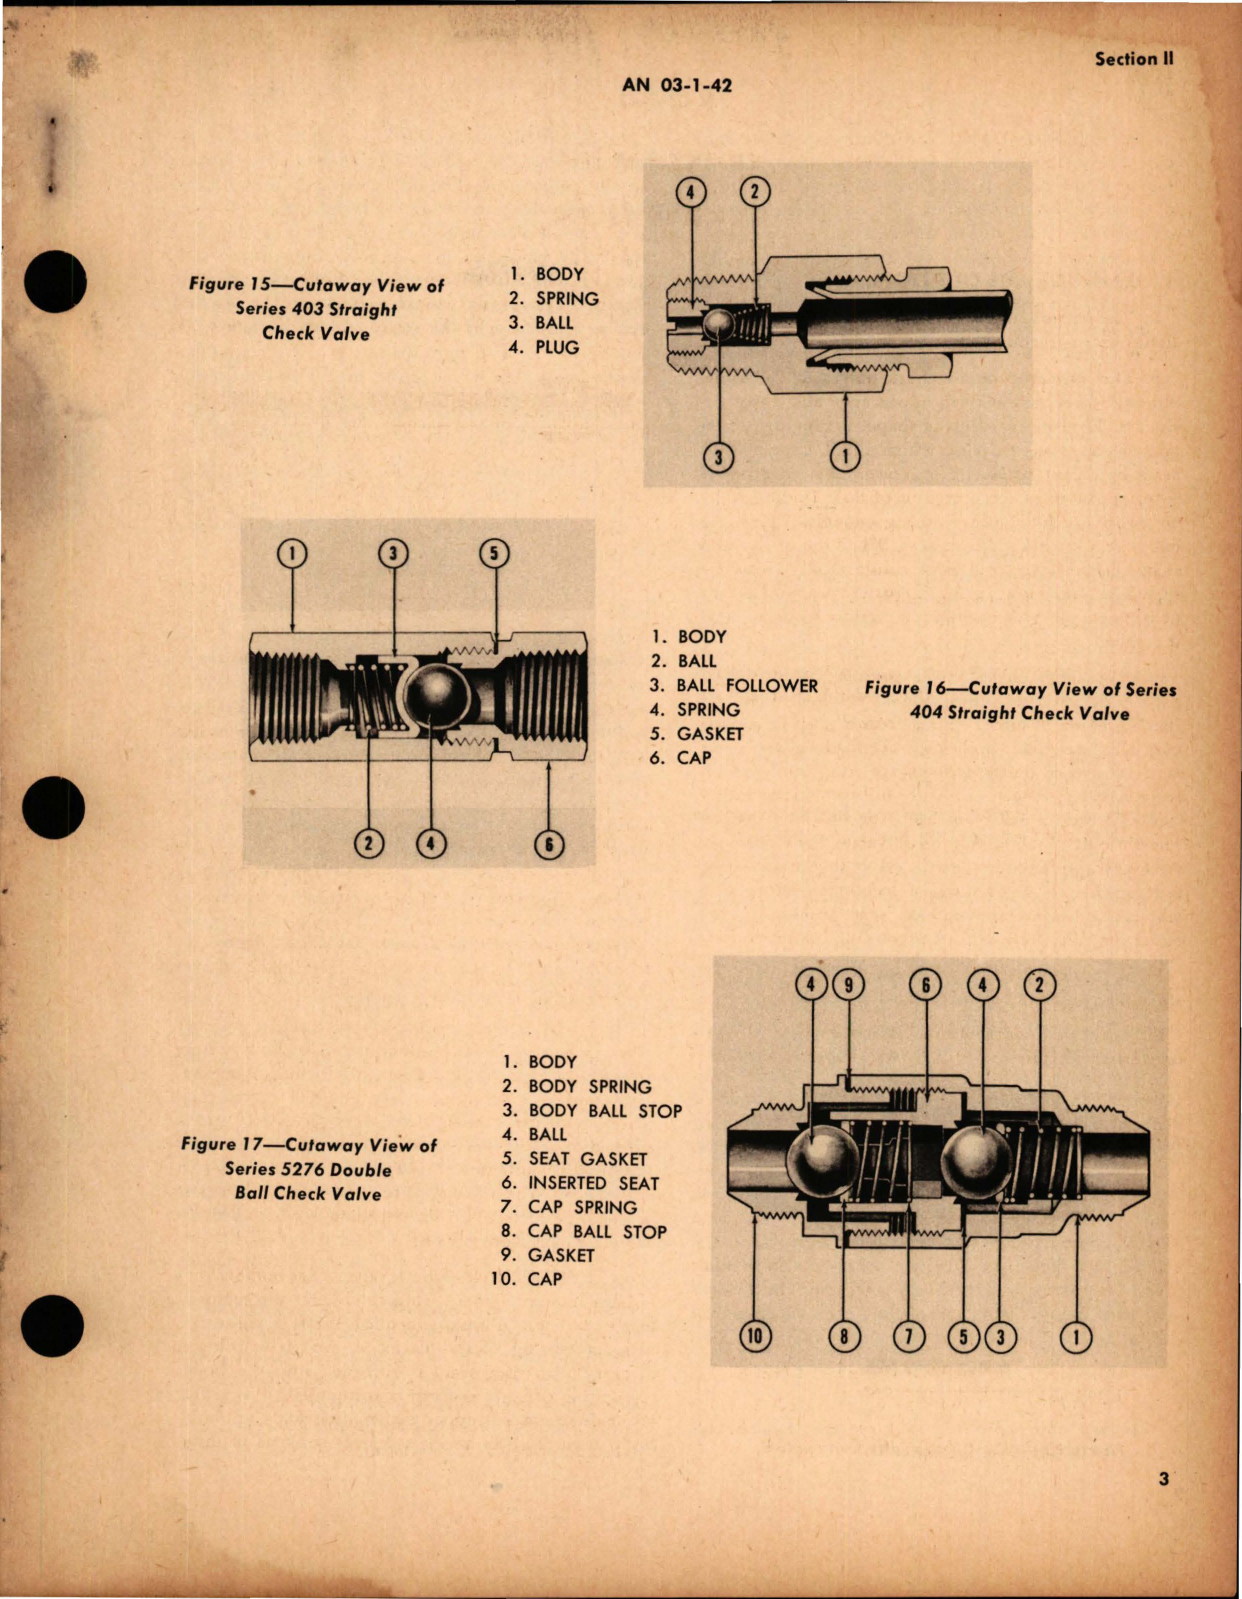 Sample page 7 from AirCorps Library document: Instructions with Parts Catalog for Check Valves